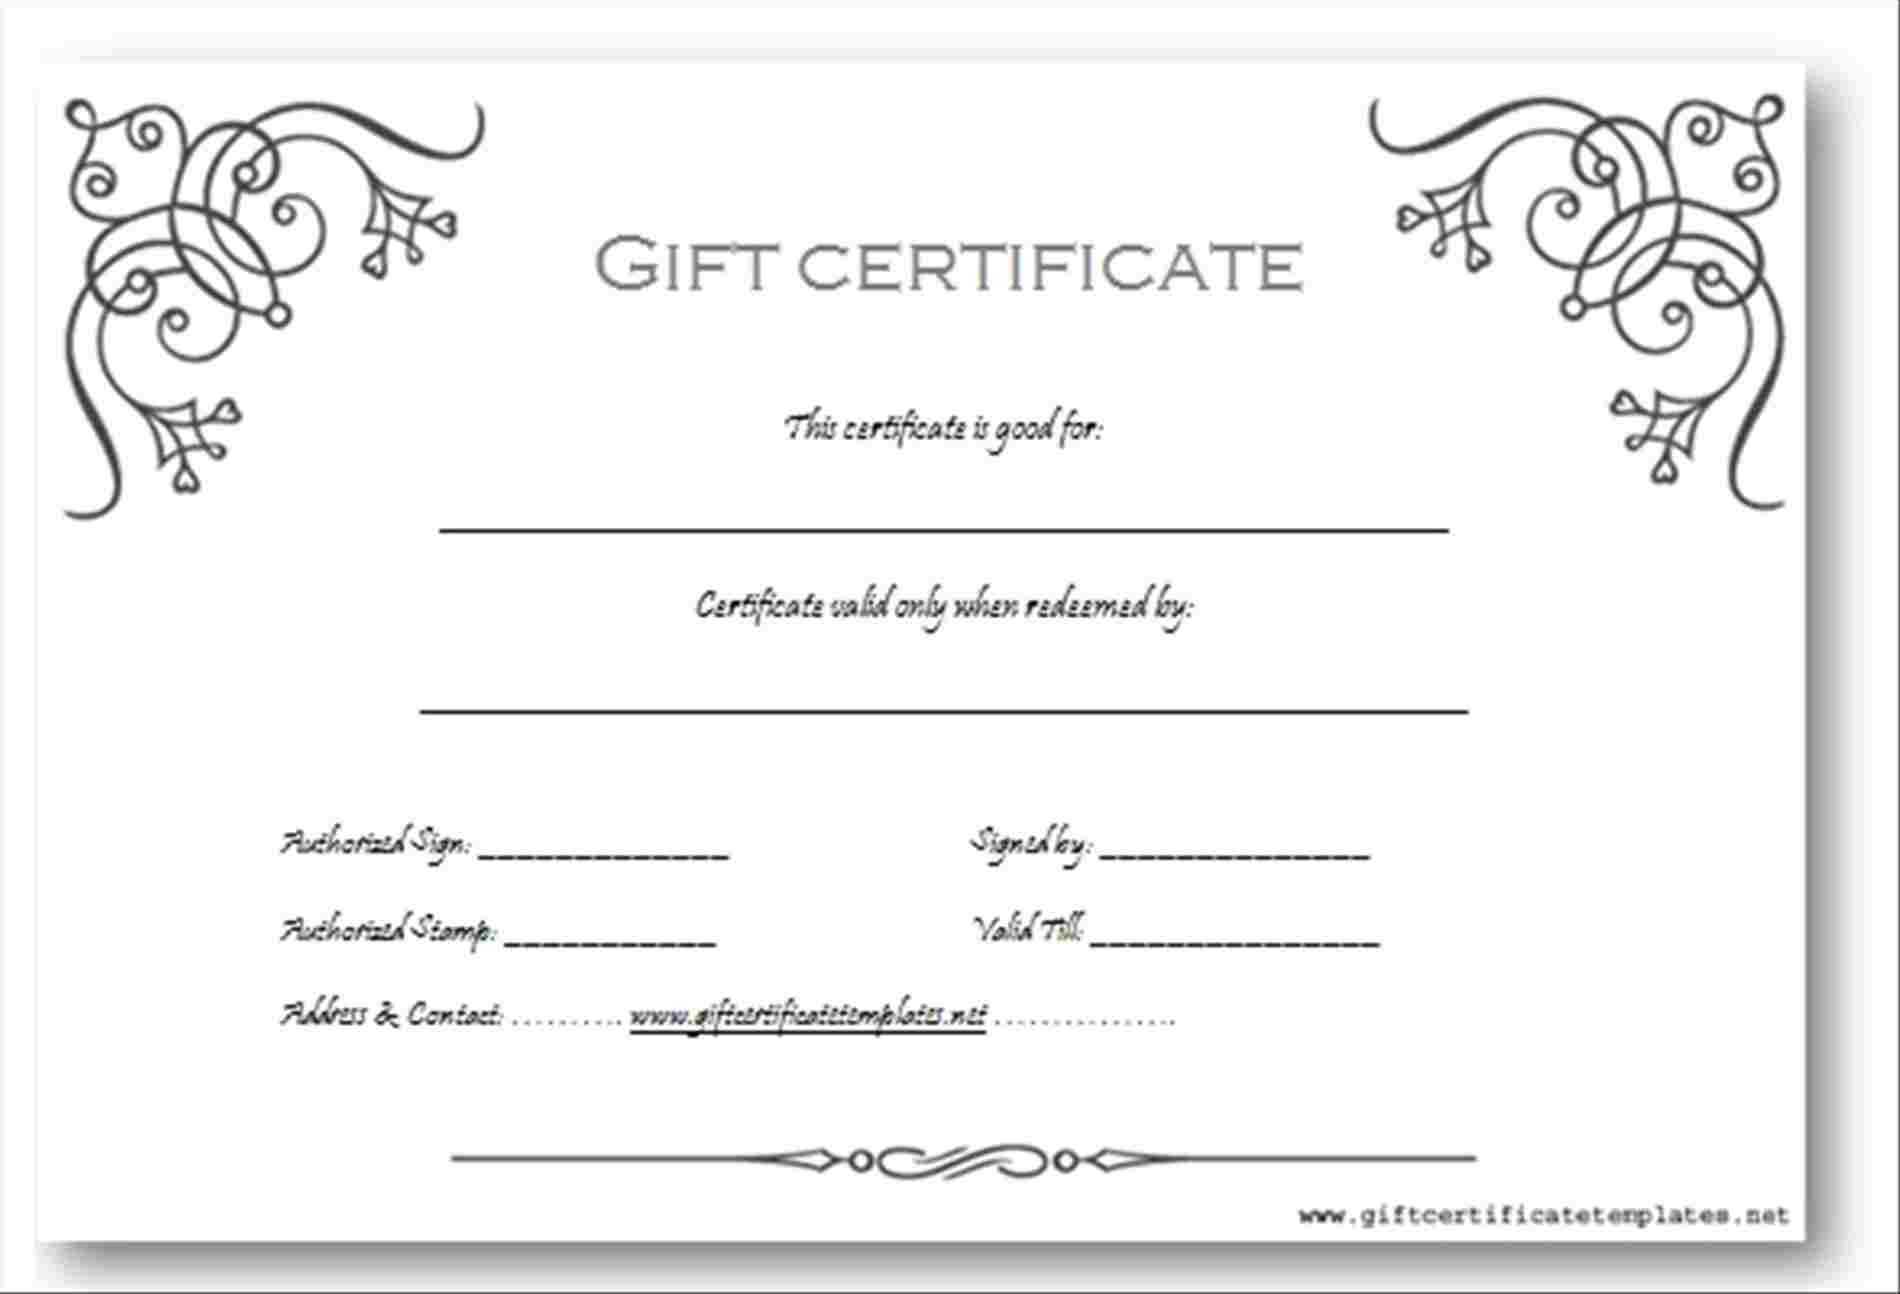 010 Photo Gift Card Template Ideas Photography Certificate Intended For Black And White Gift Certificate Template Free